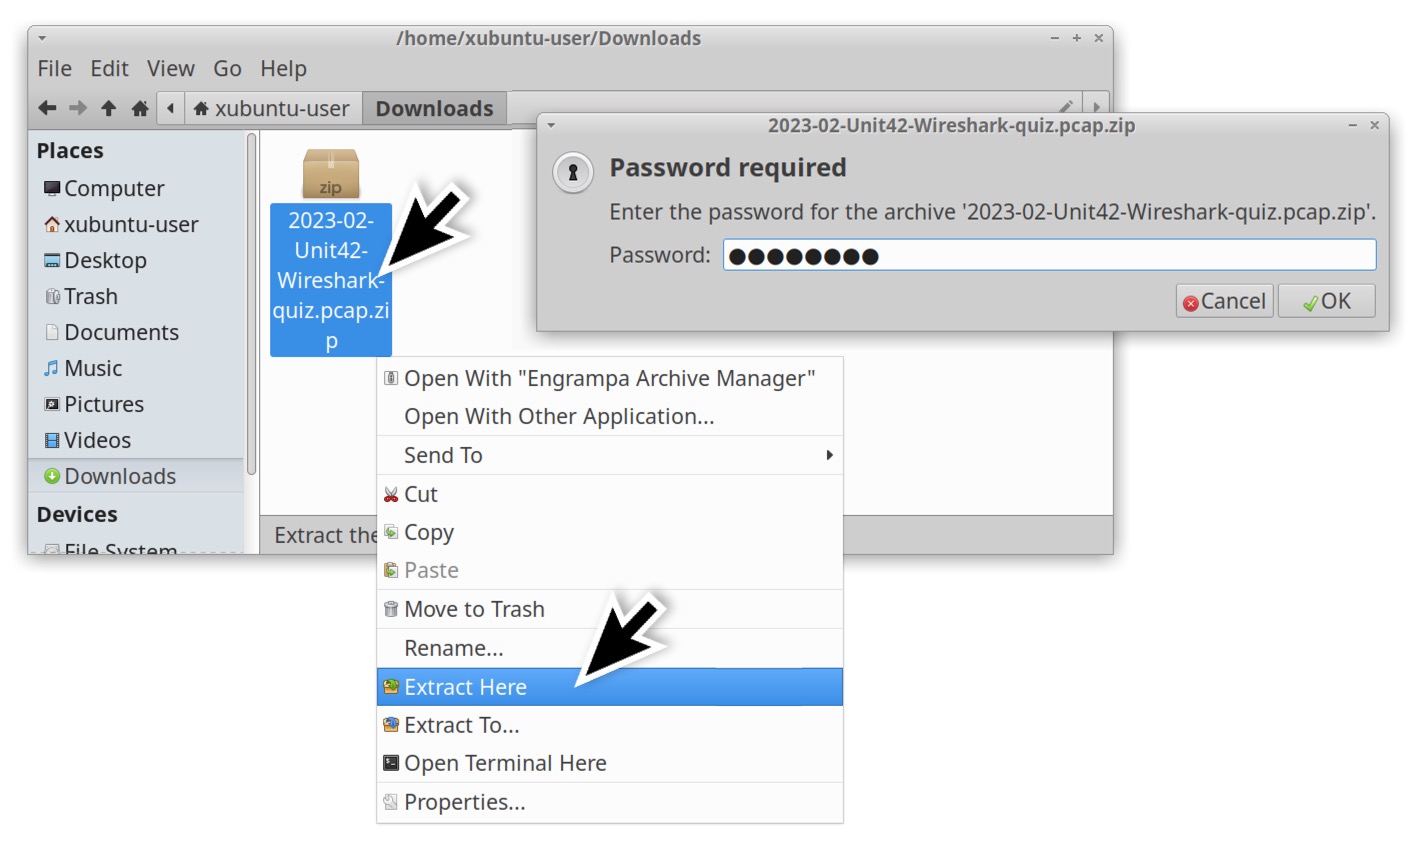 Image 2 shows how to extract the password-protected .zip archive from the download folder, entering the password and specifying the extraction location.